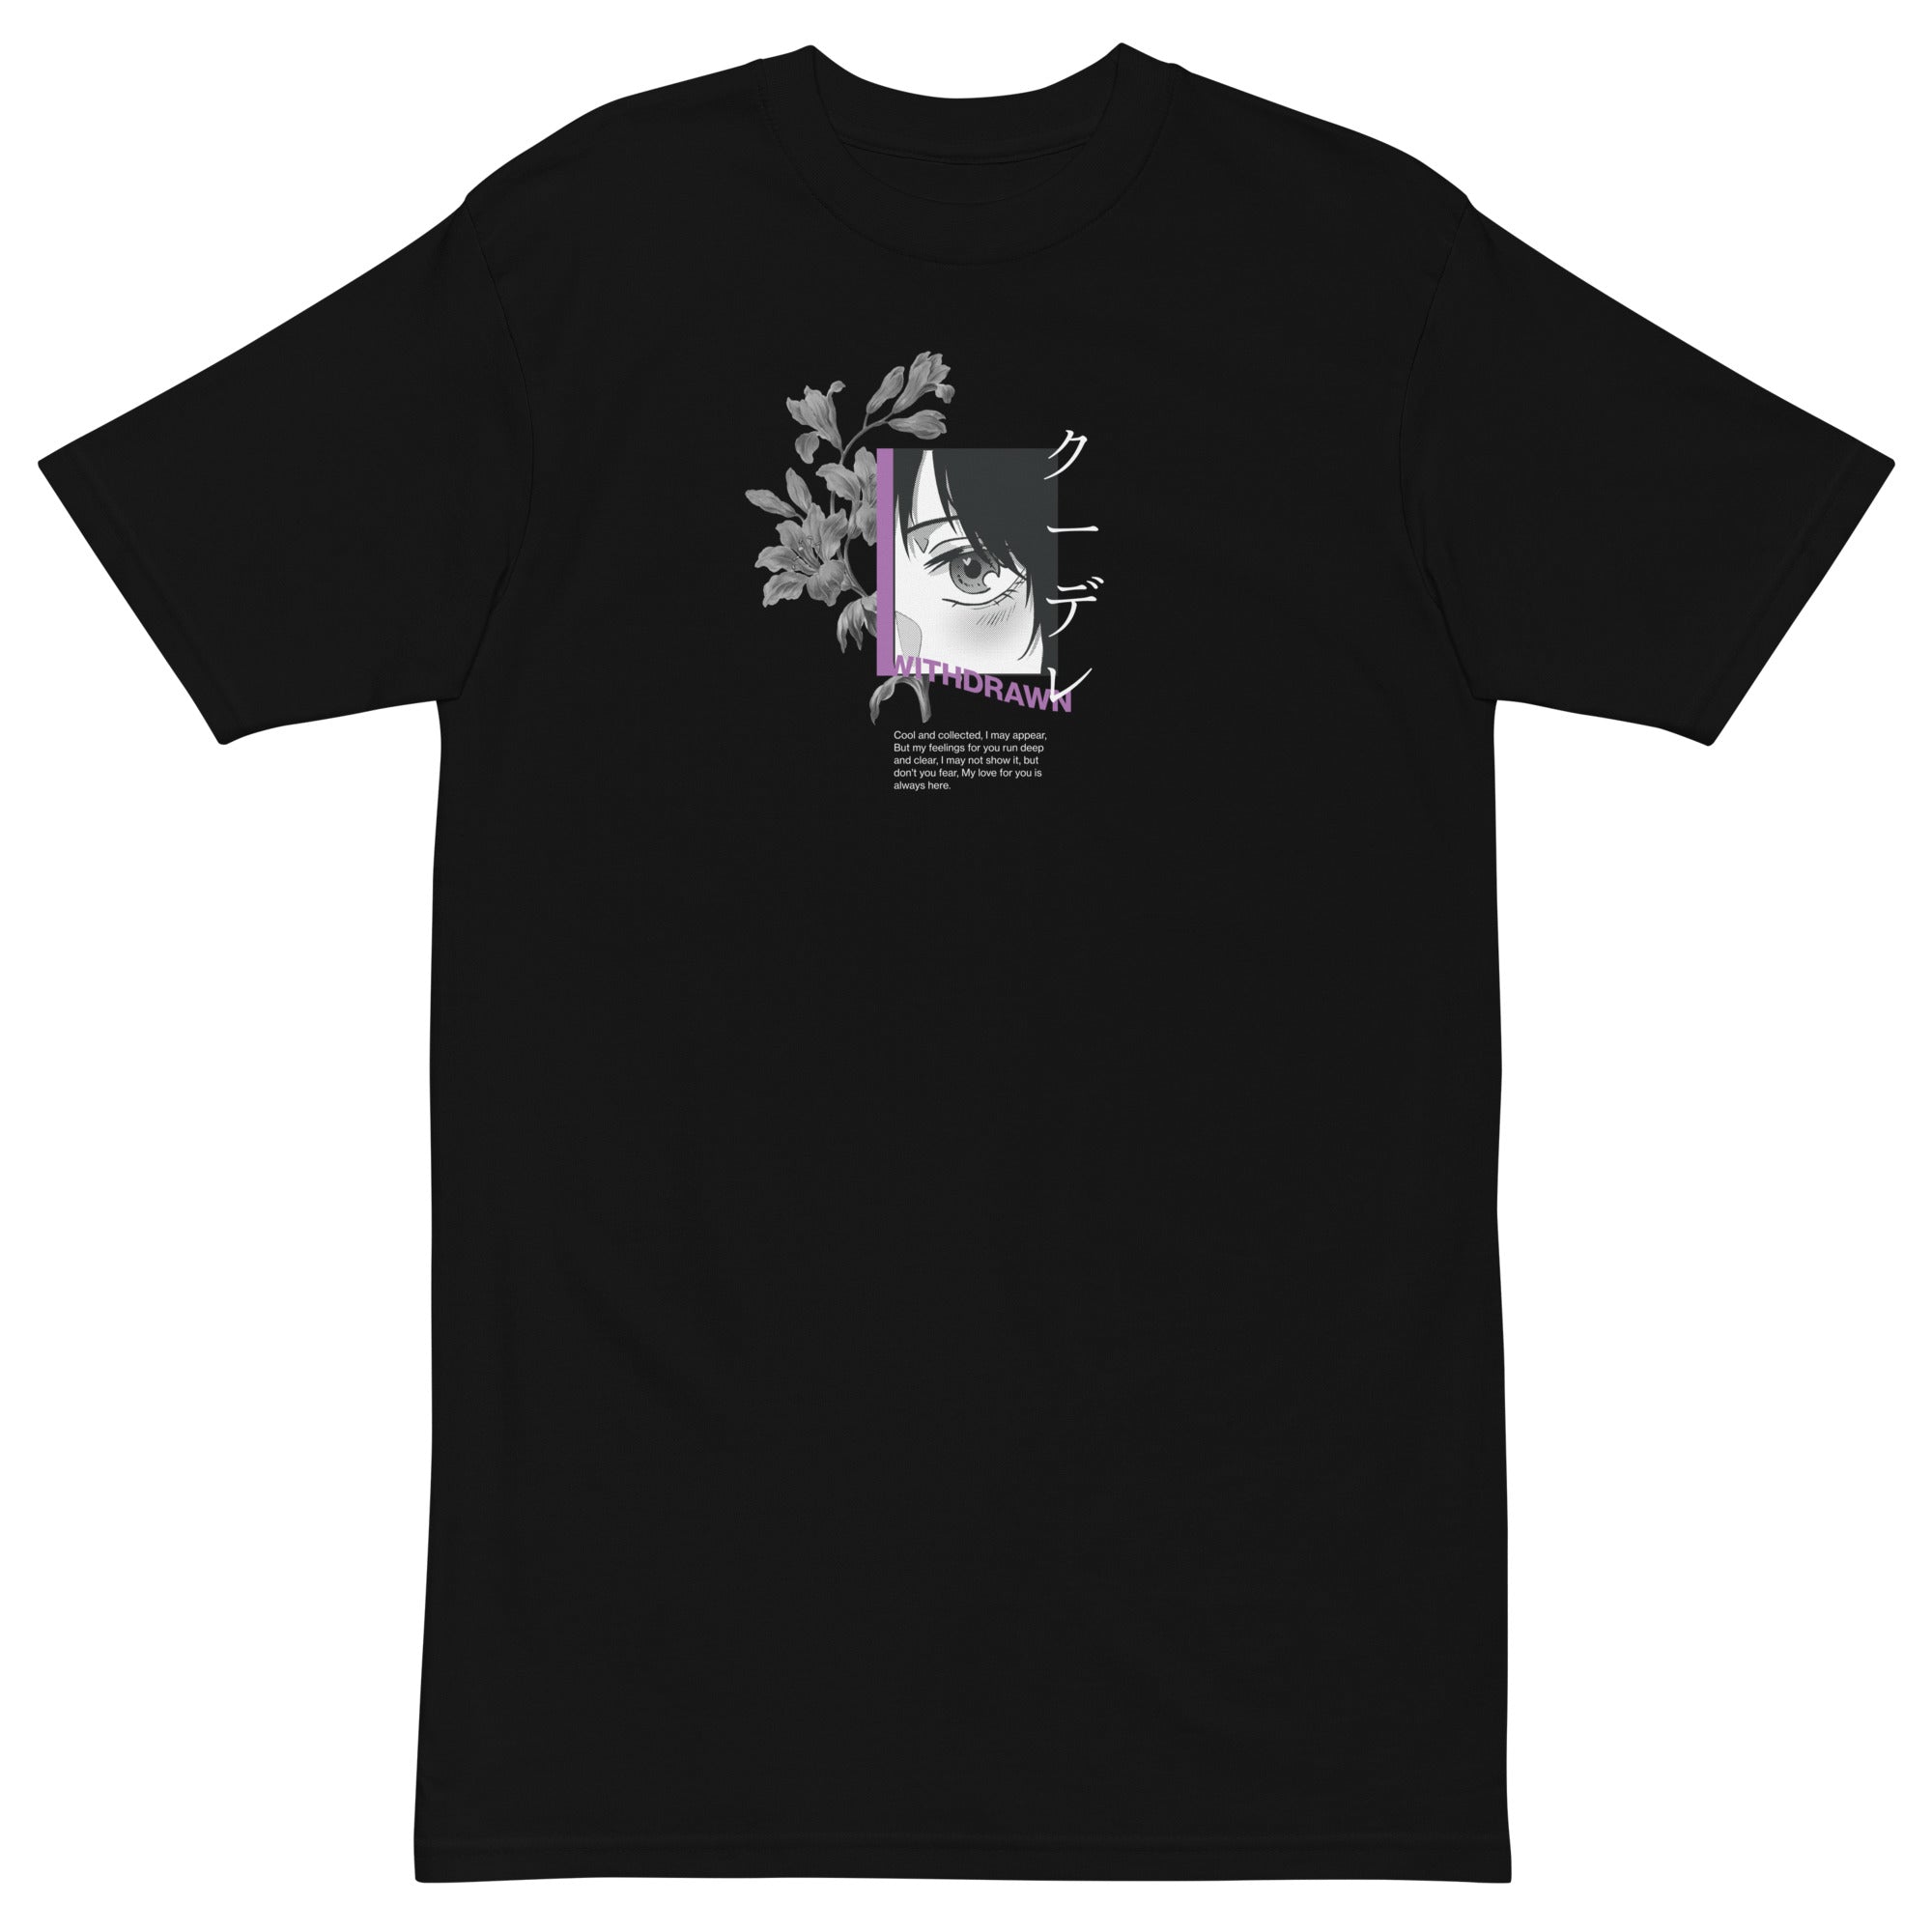 WITHDRAWN • anime t-shirt - Jackler - anime-inspired streetwear - anime clothing